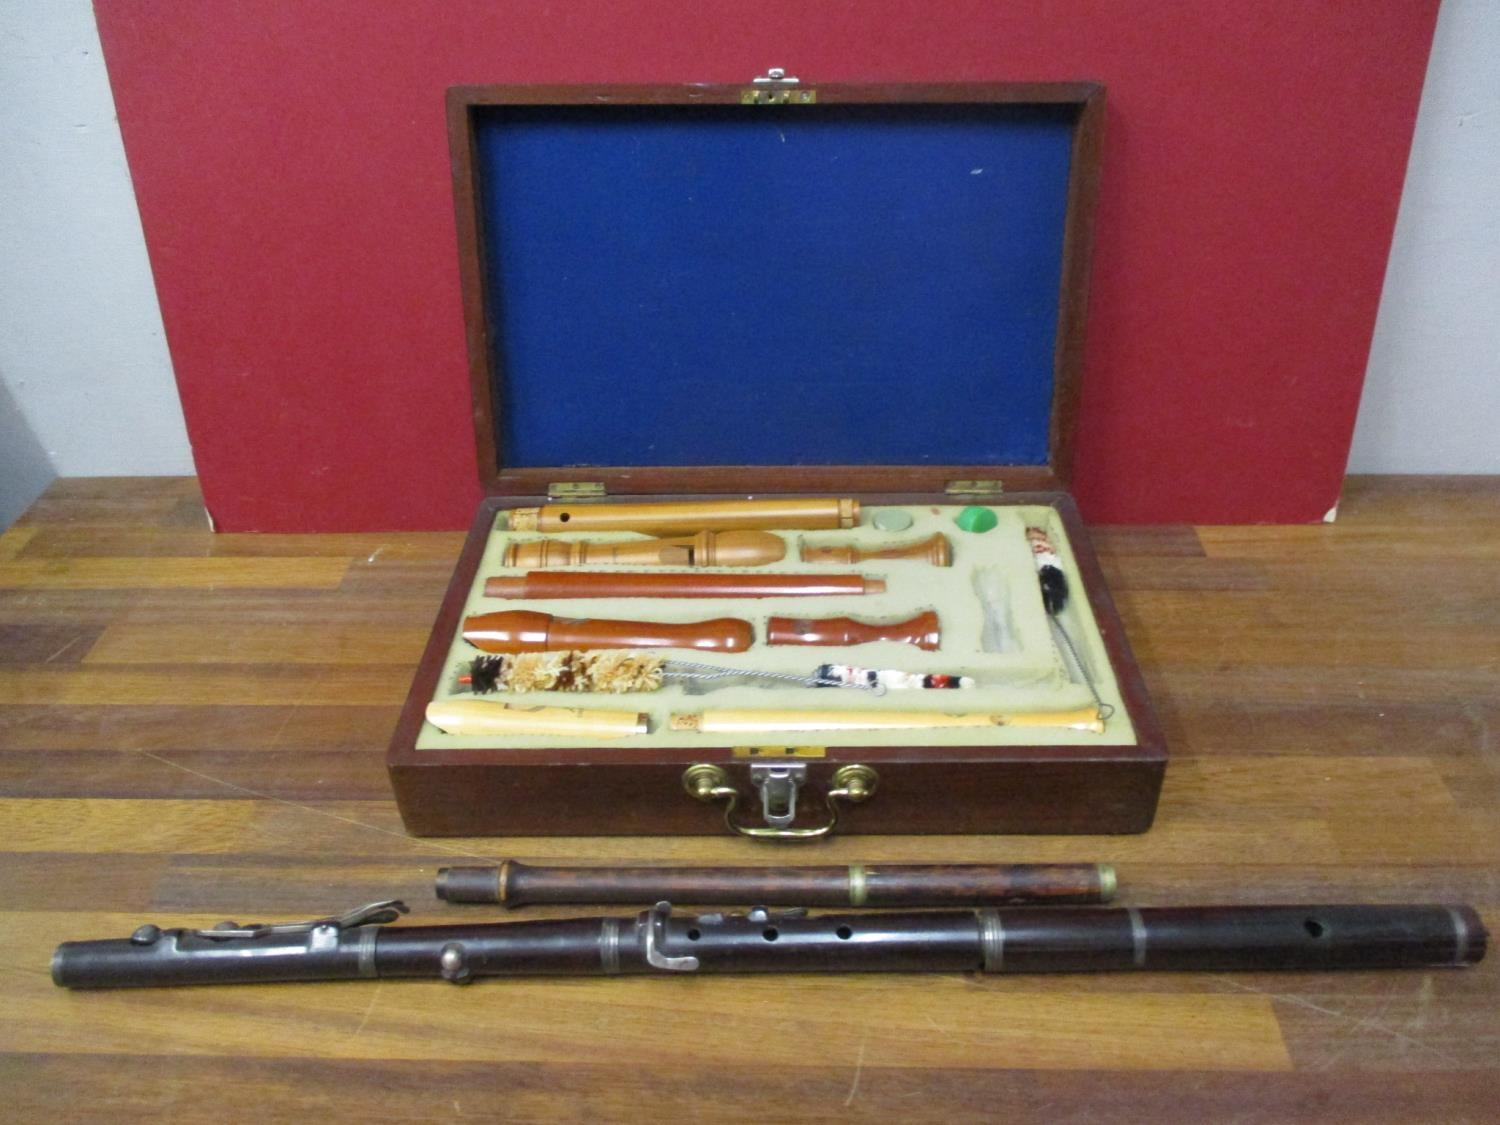 Three recorders and the component parts of a late 19th century/early 20th century flute and - Image 2 of 6